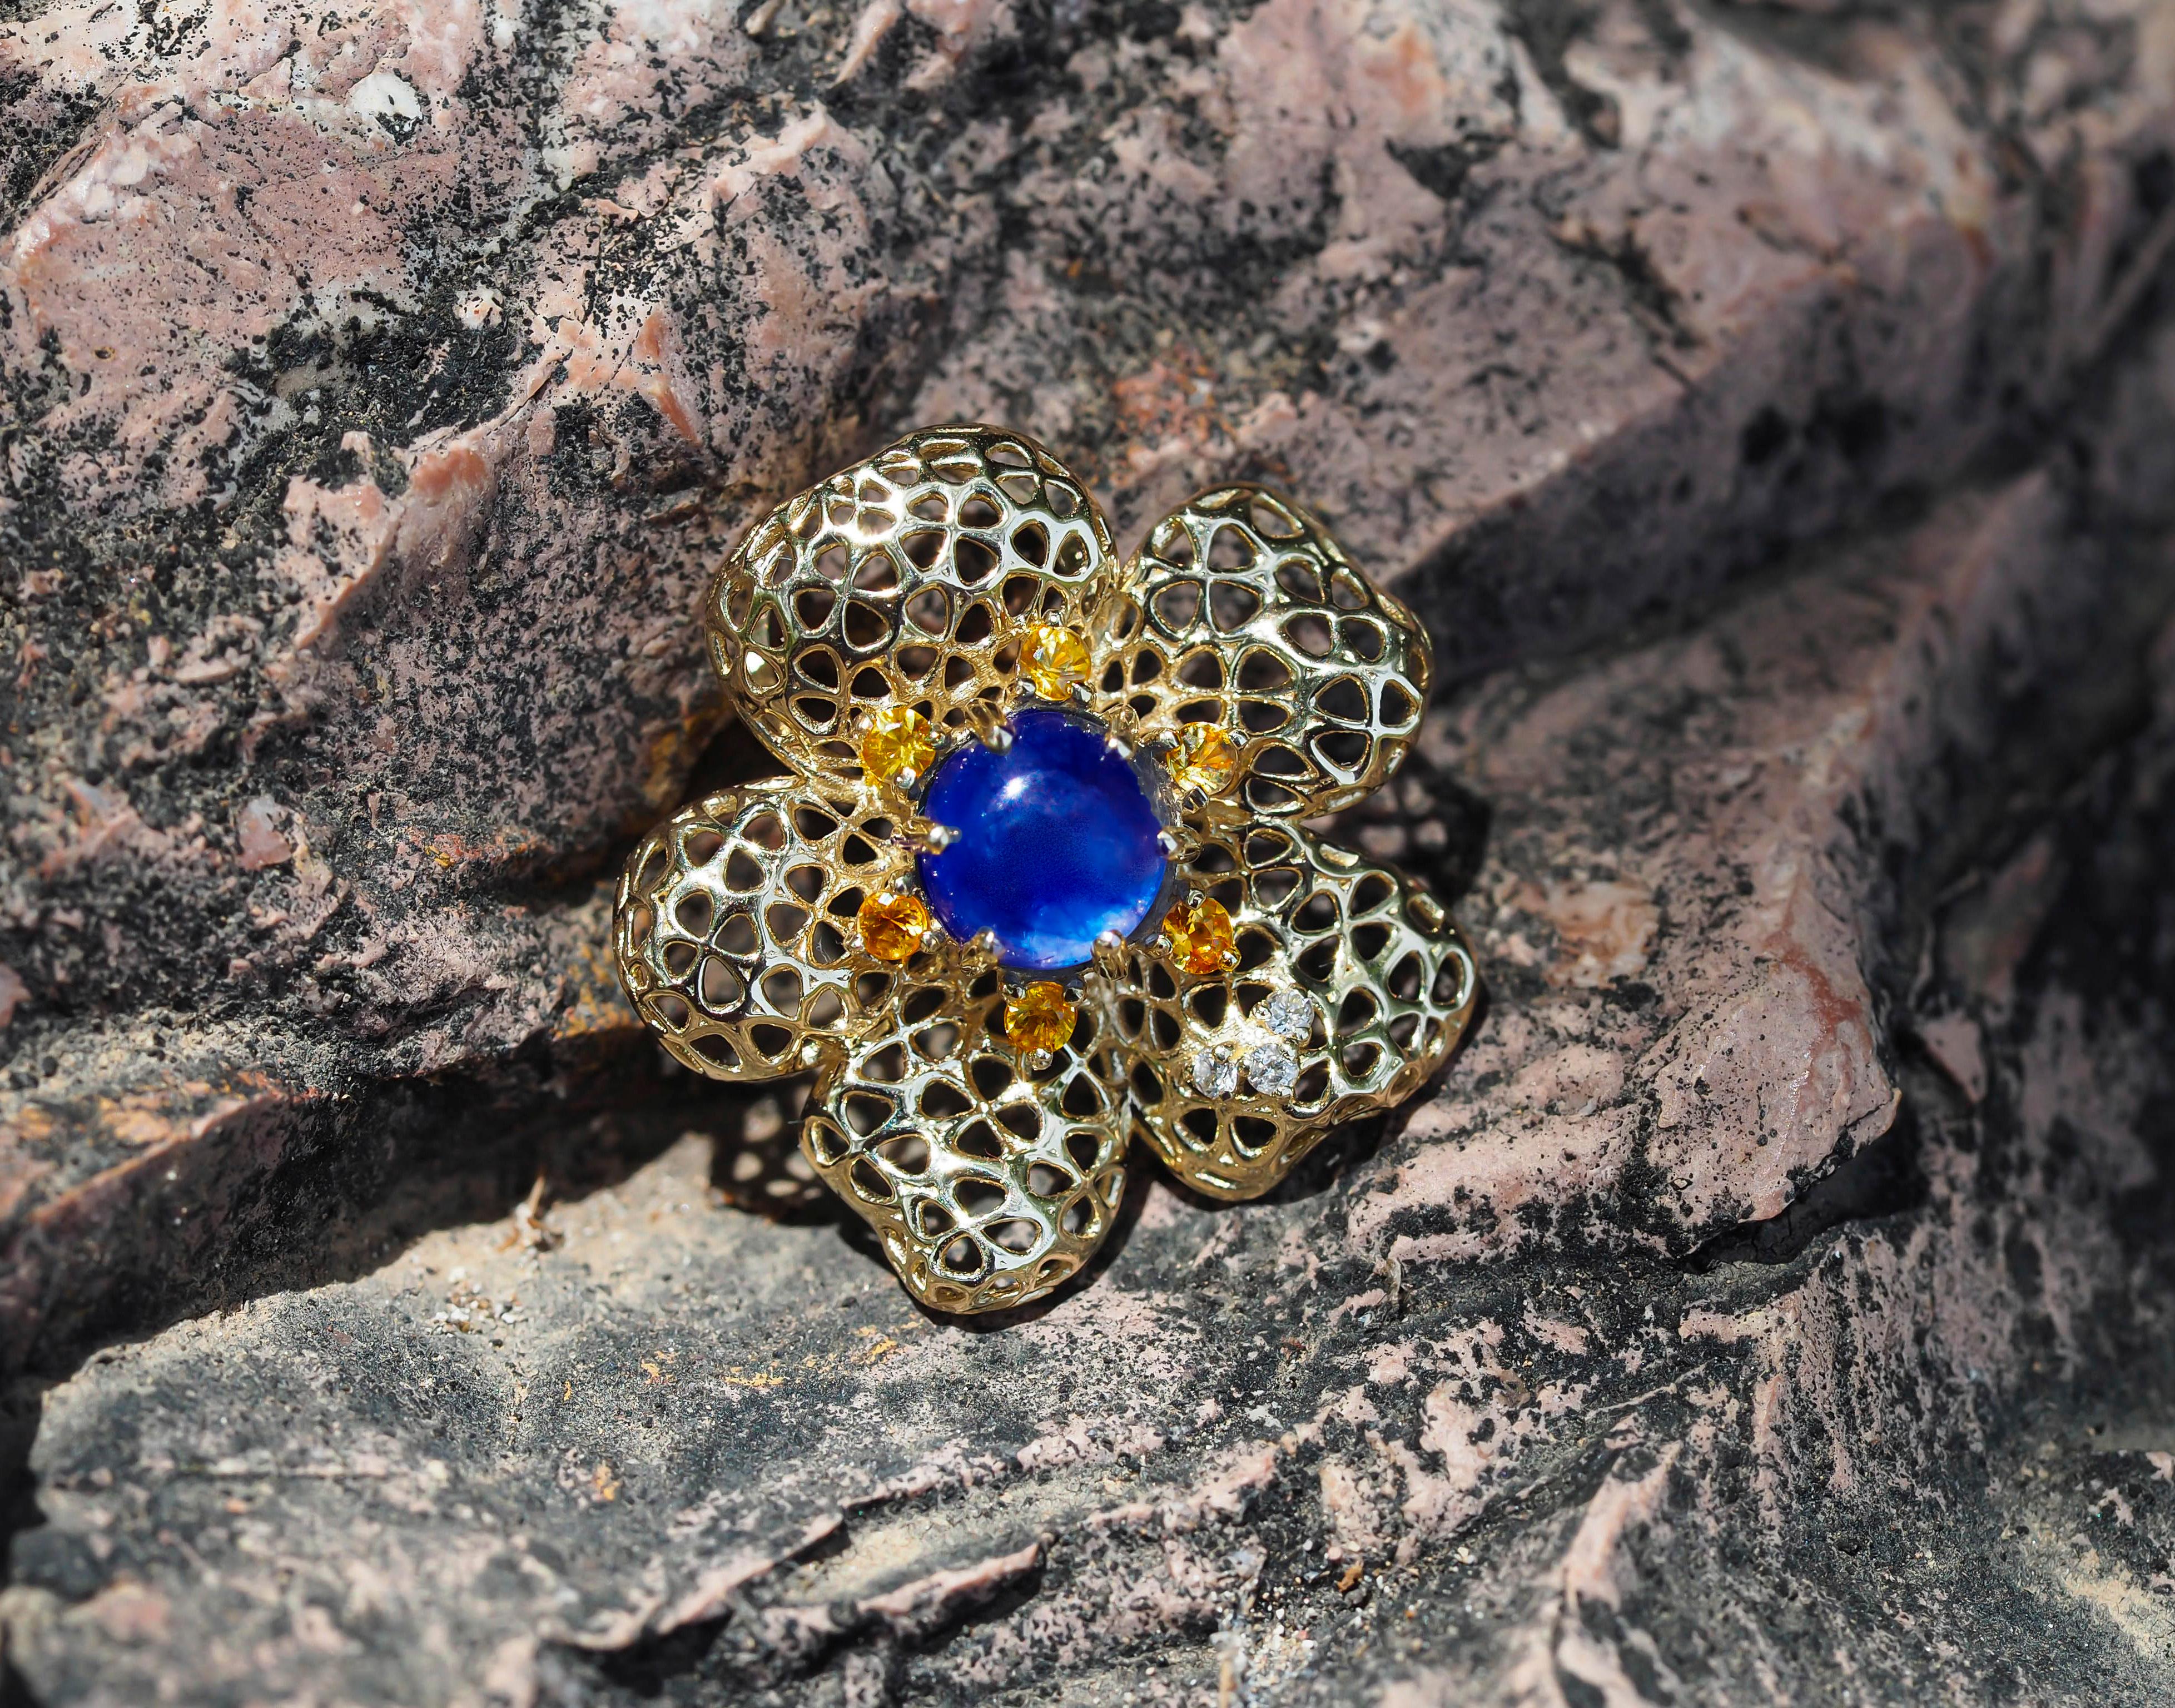 Flower pendant with sapphire. 
Cabochon sapphire 14k Gold pendant. Gold flower pendant. Blue sapphire pendant. Floral gold pendant.

Metal: 14k gold
Weight: 2.20 g.
Size 20 mm.

Central stone: Sapphire
Cut: Round cabochon
Weight: approx 1.30